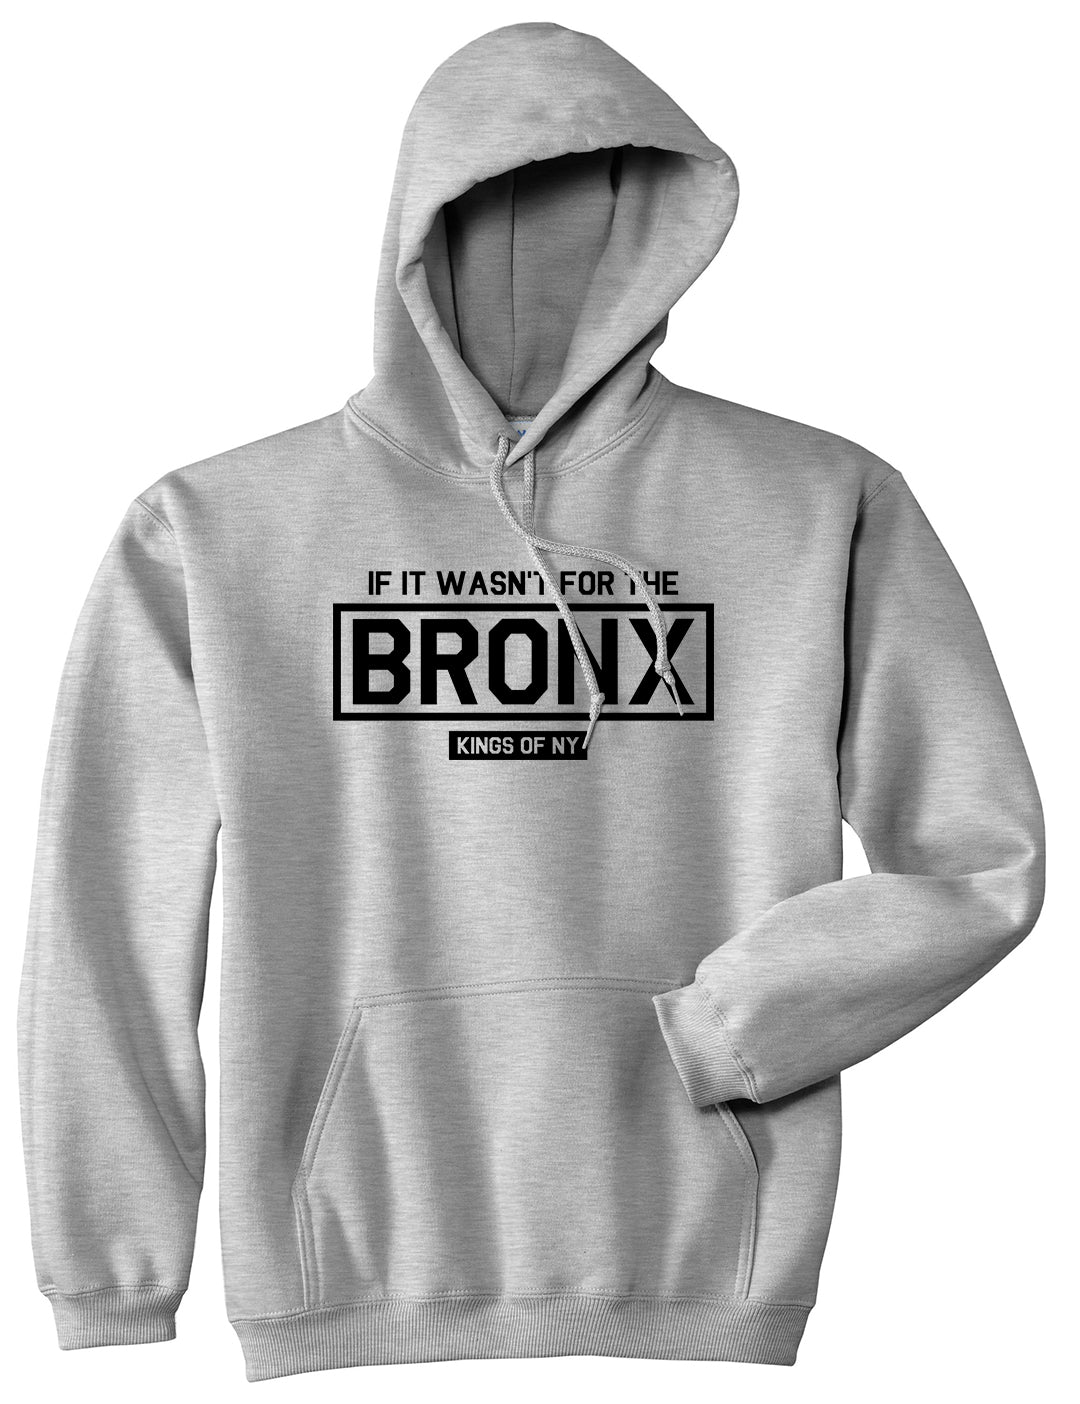 If It Wasnt For The Bronx Mens Pullover Hoodie Grey by Kings Of NY